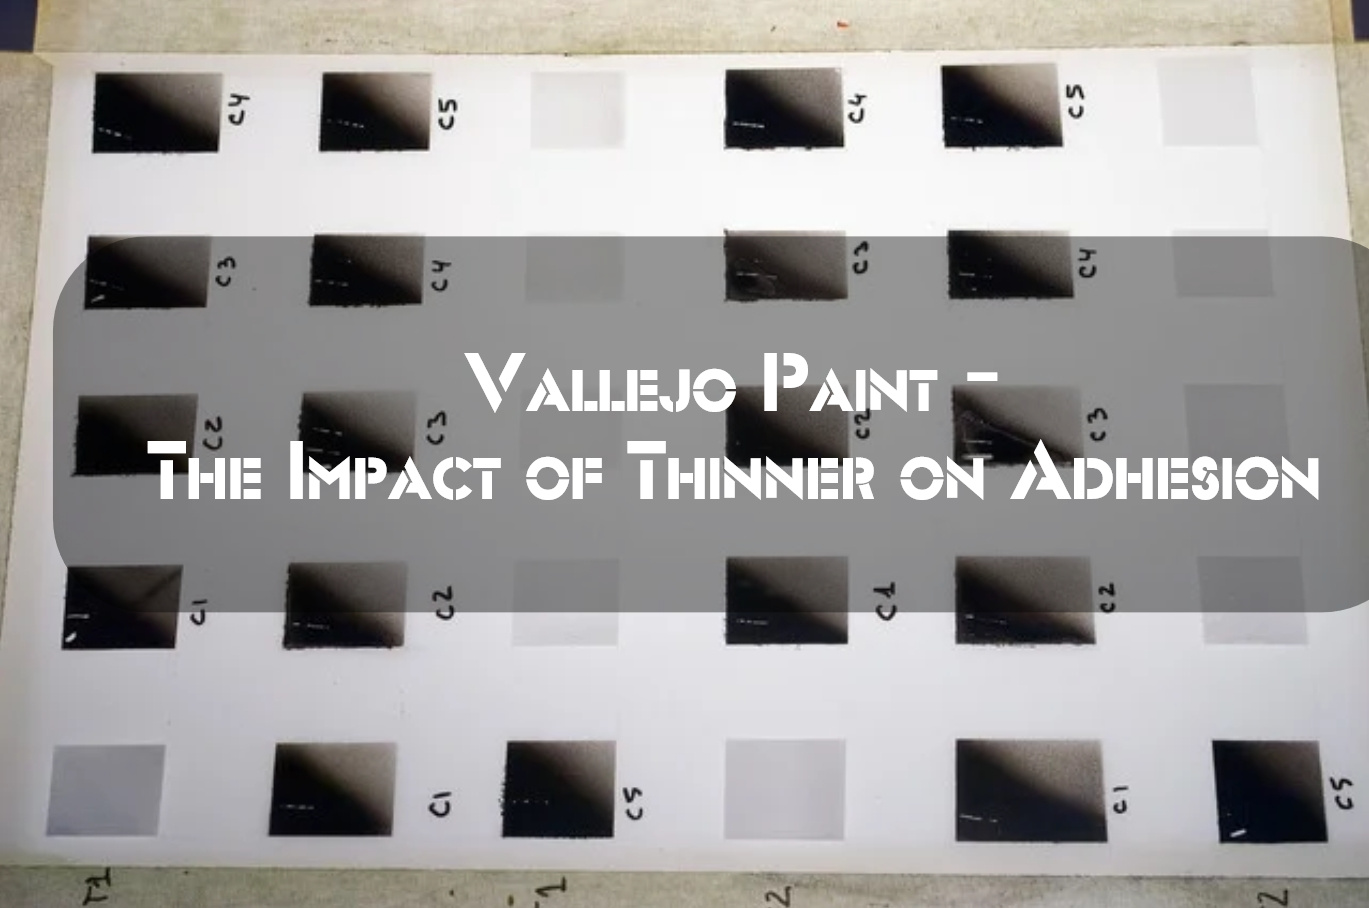 Vallejo Paint - The Impact of Thinner on Adhesion